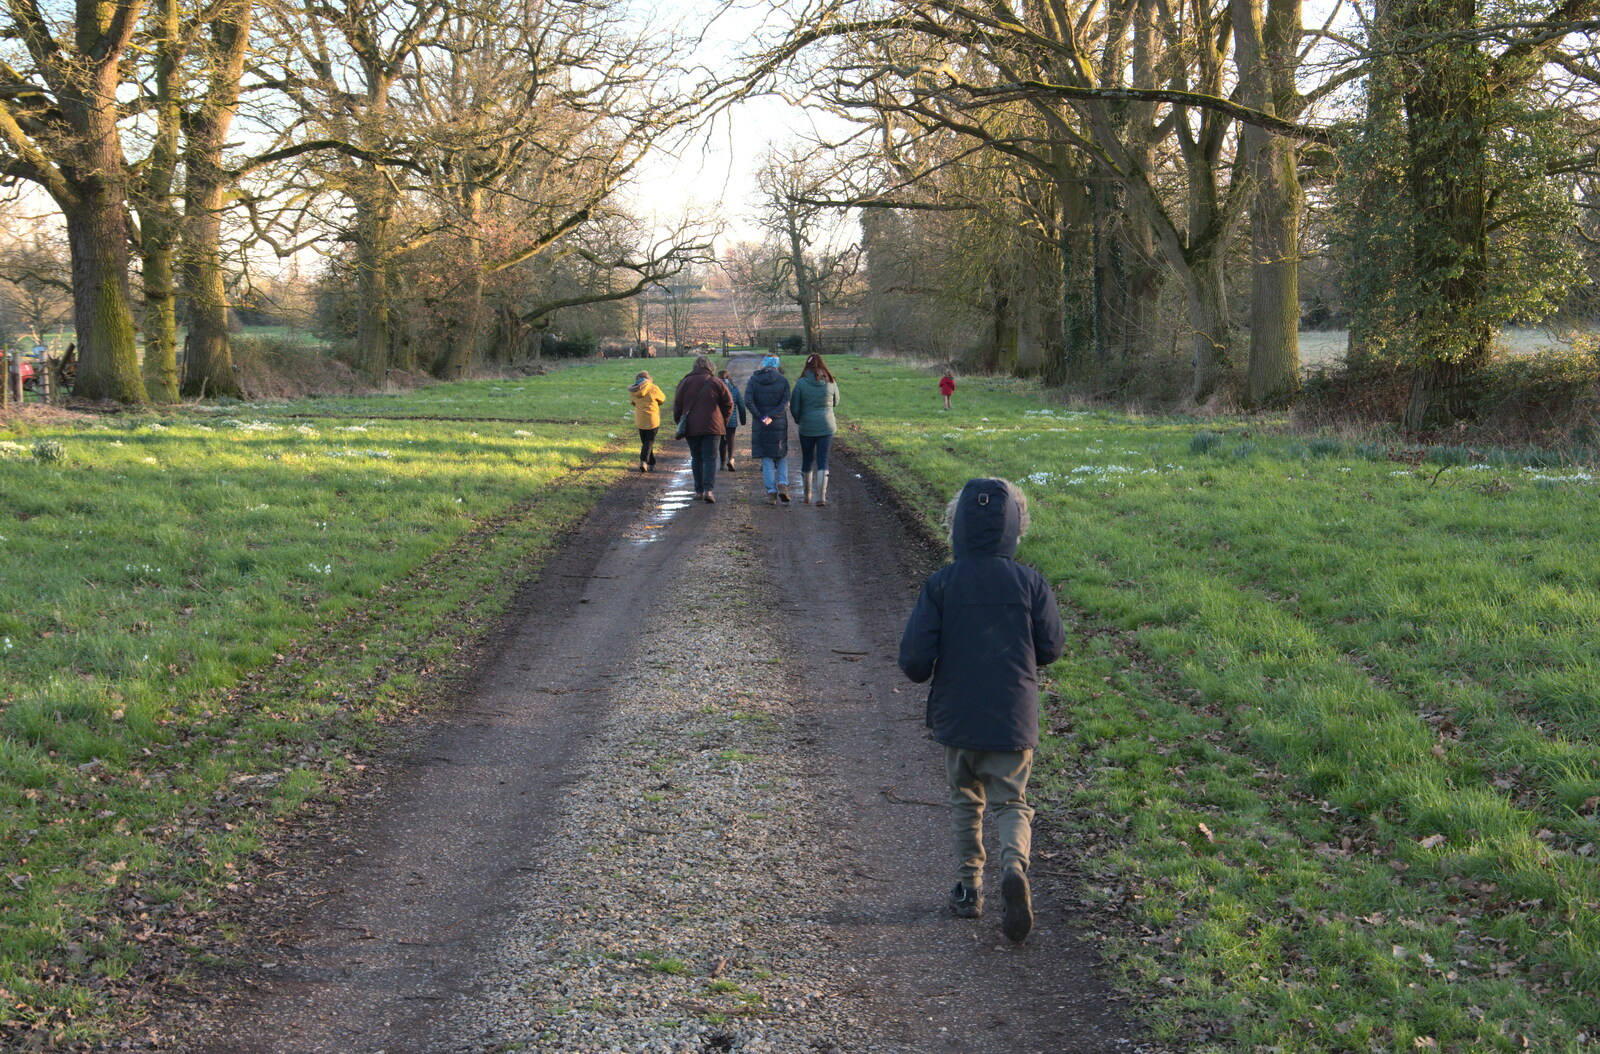 On the drive back to the road from Snowdrops at Talconeston Hall, Tacolneston, Norfolk - 7th February 2020